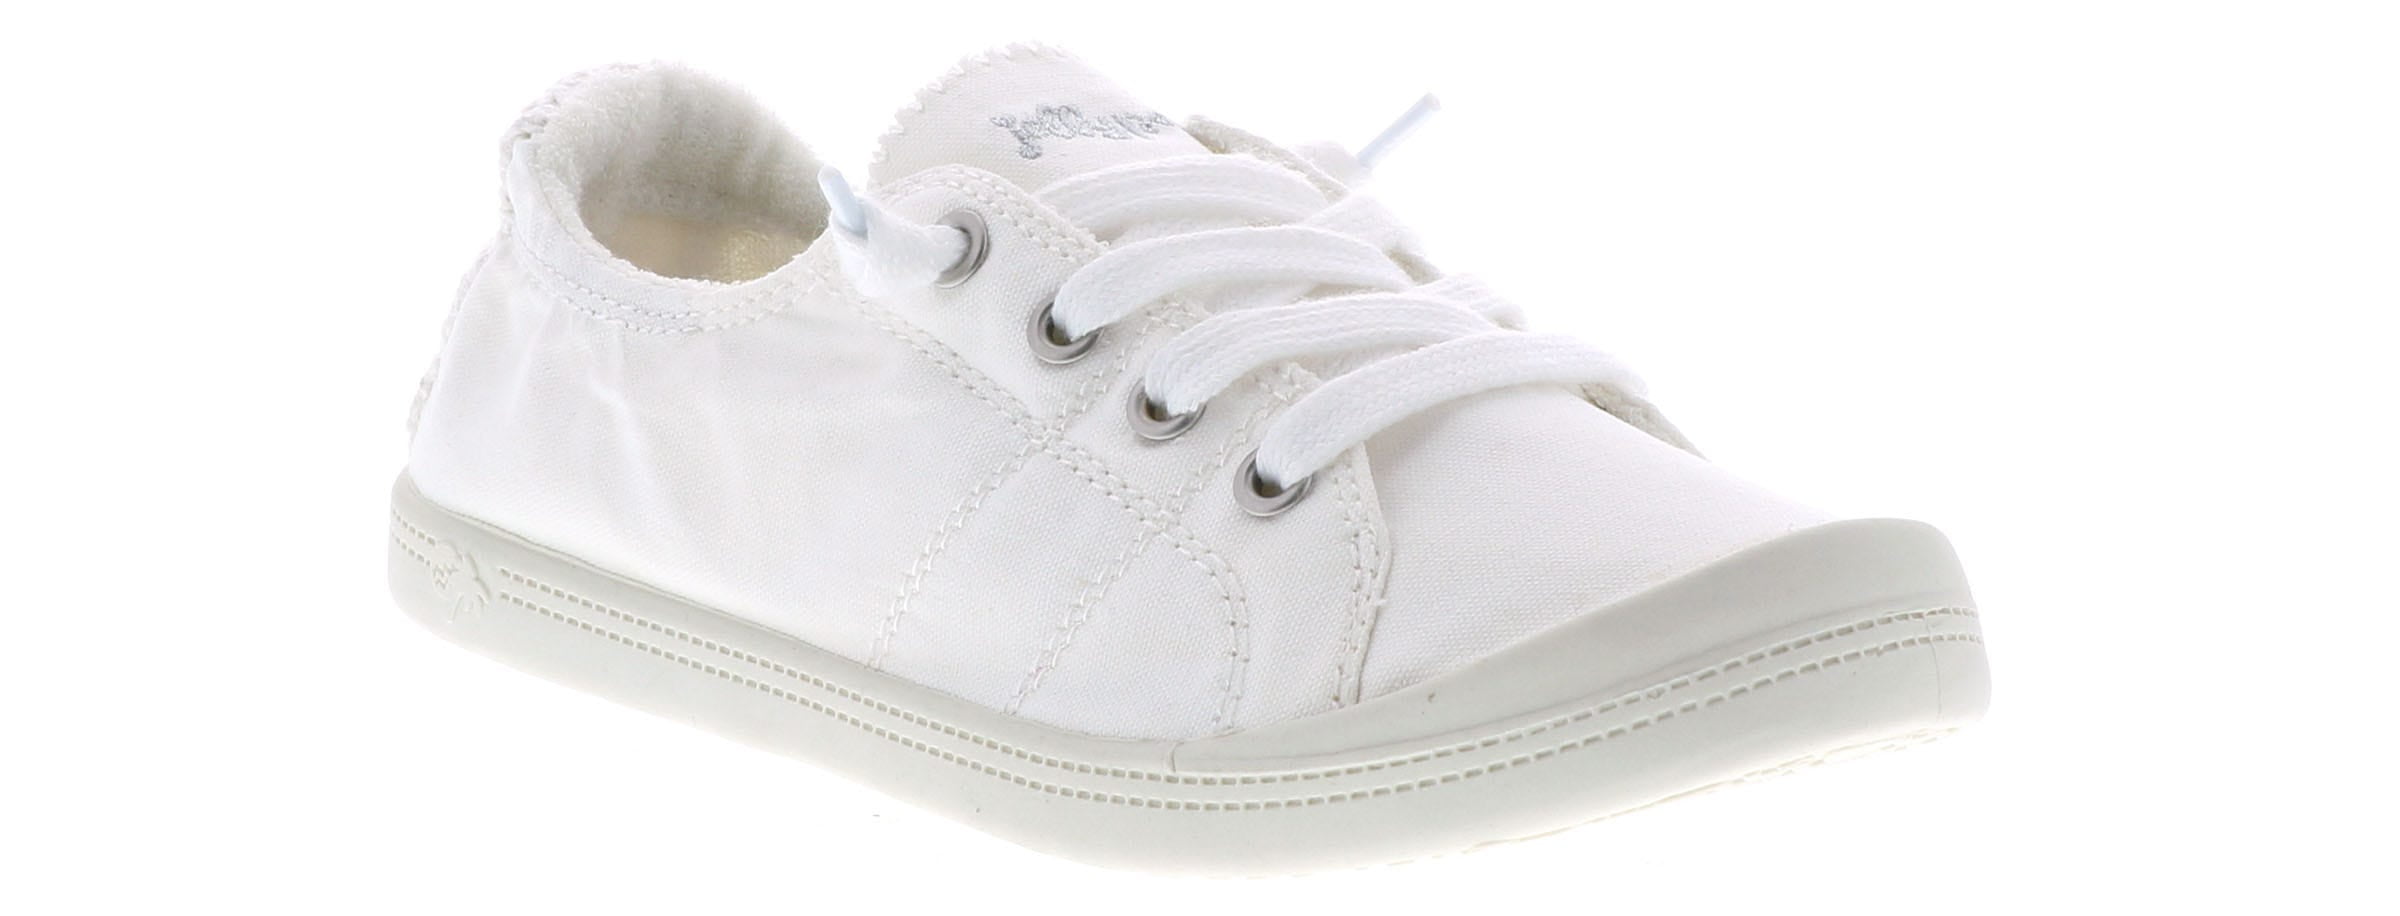 jellypop white shoes